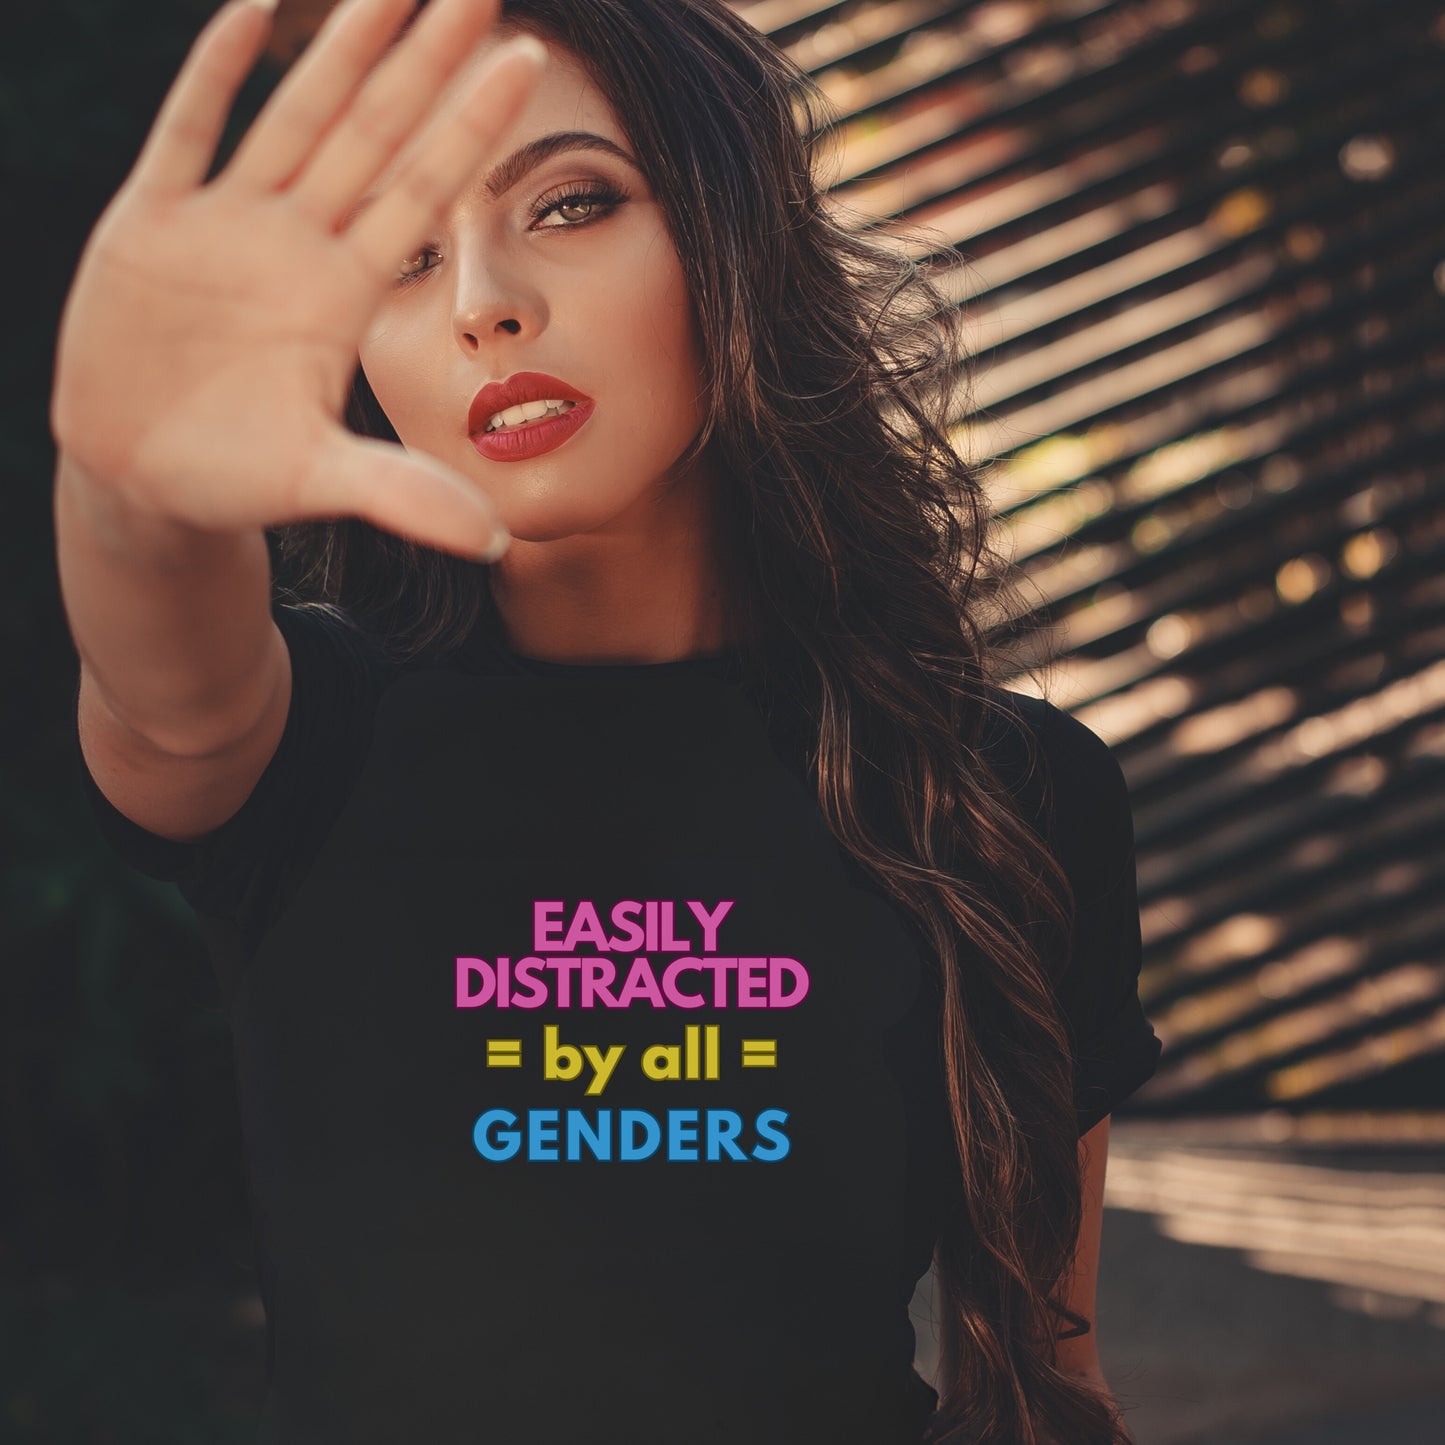 Easily Distracted by All Genders T-shirt